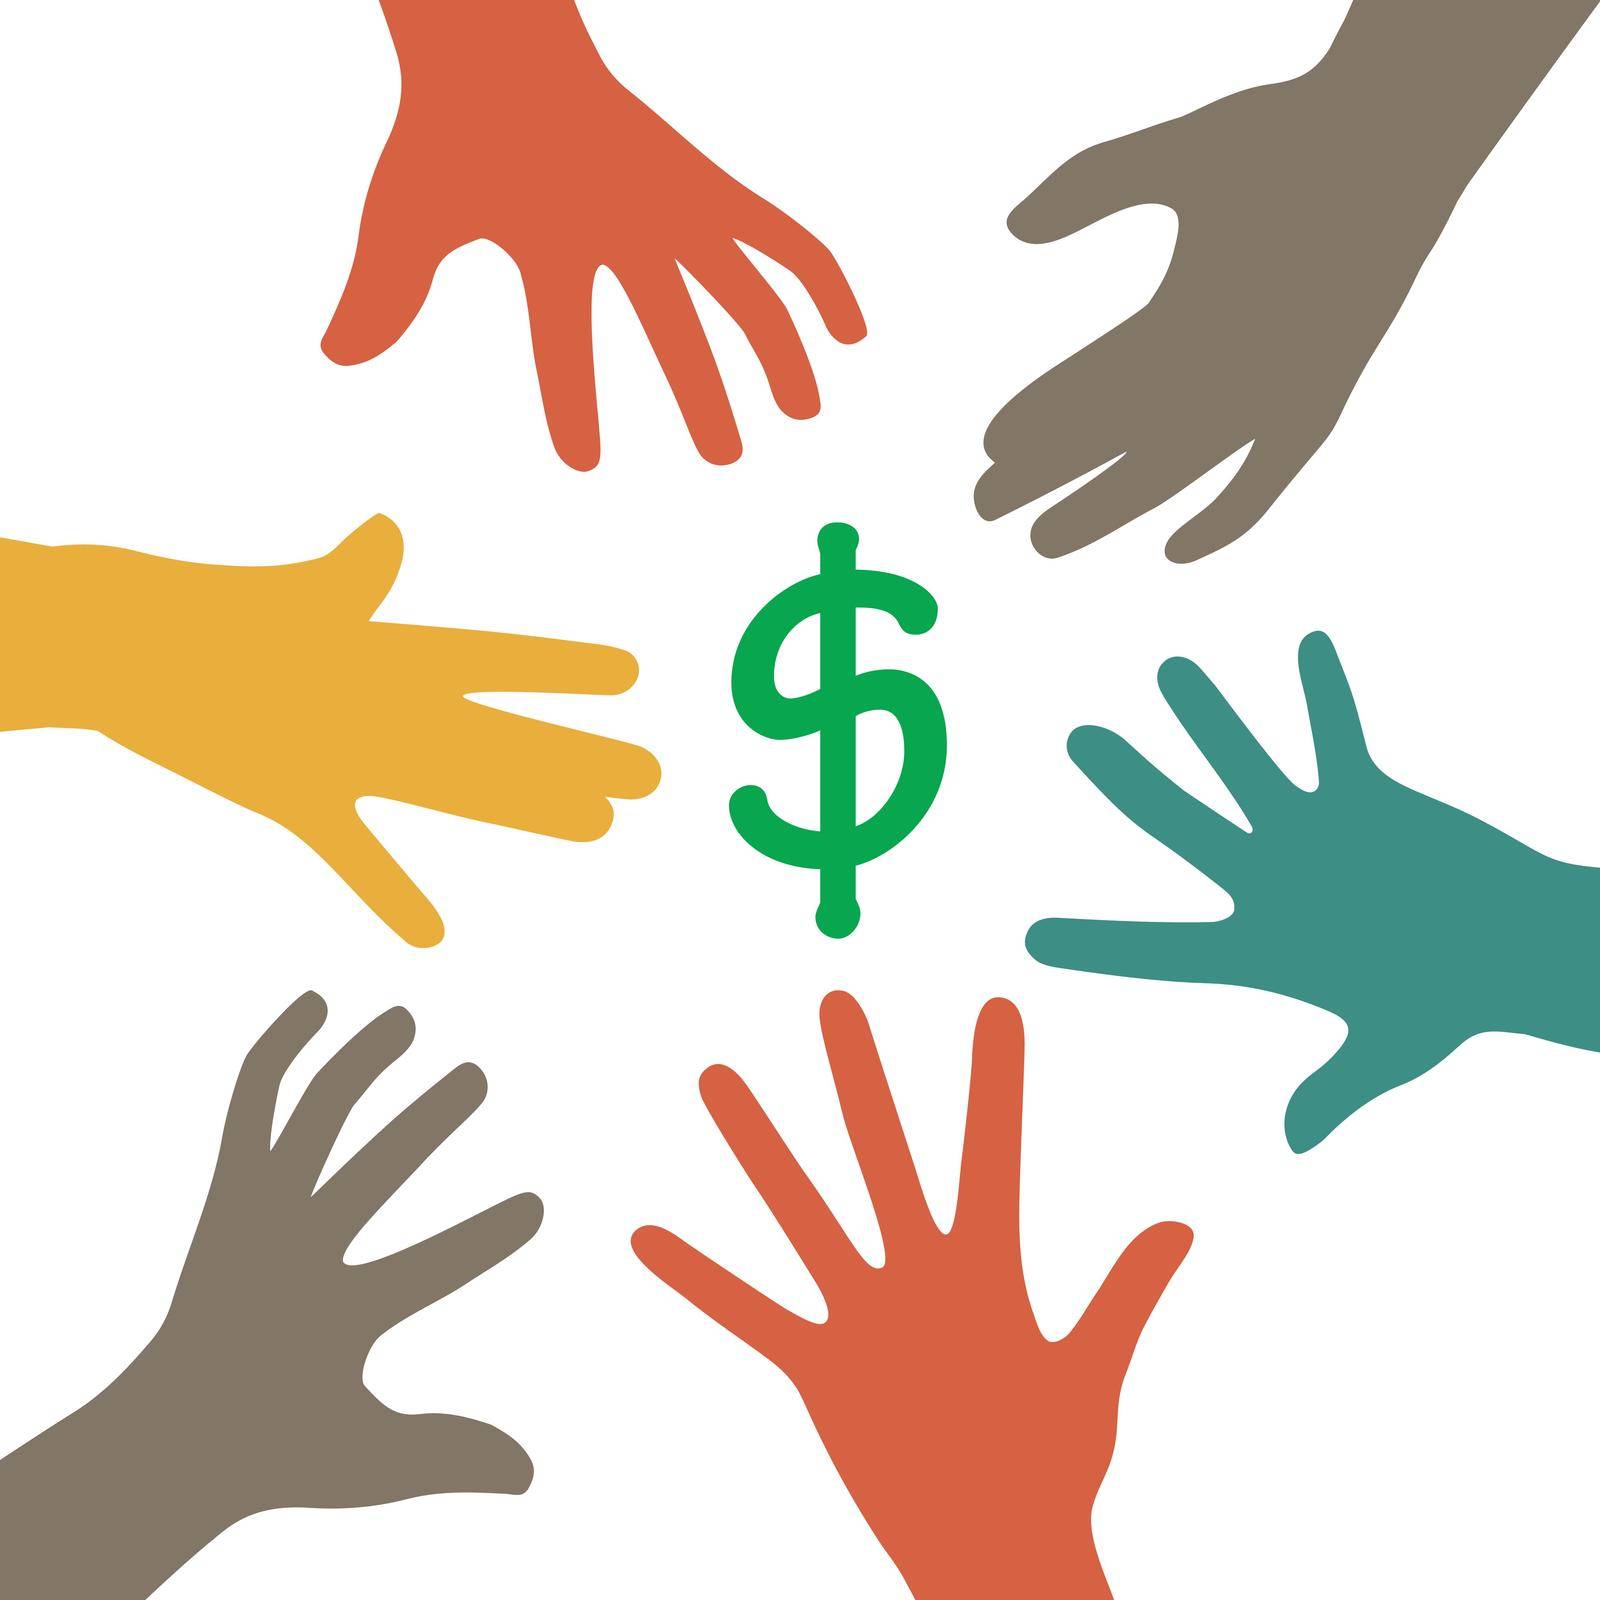 Many hands trying to get money. Several hands reaching out to grab dollars. Business concept vector illustration